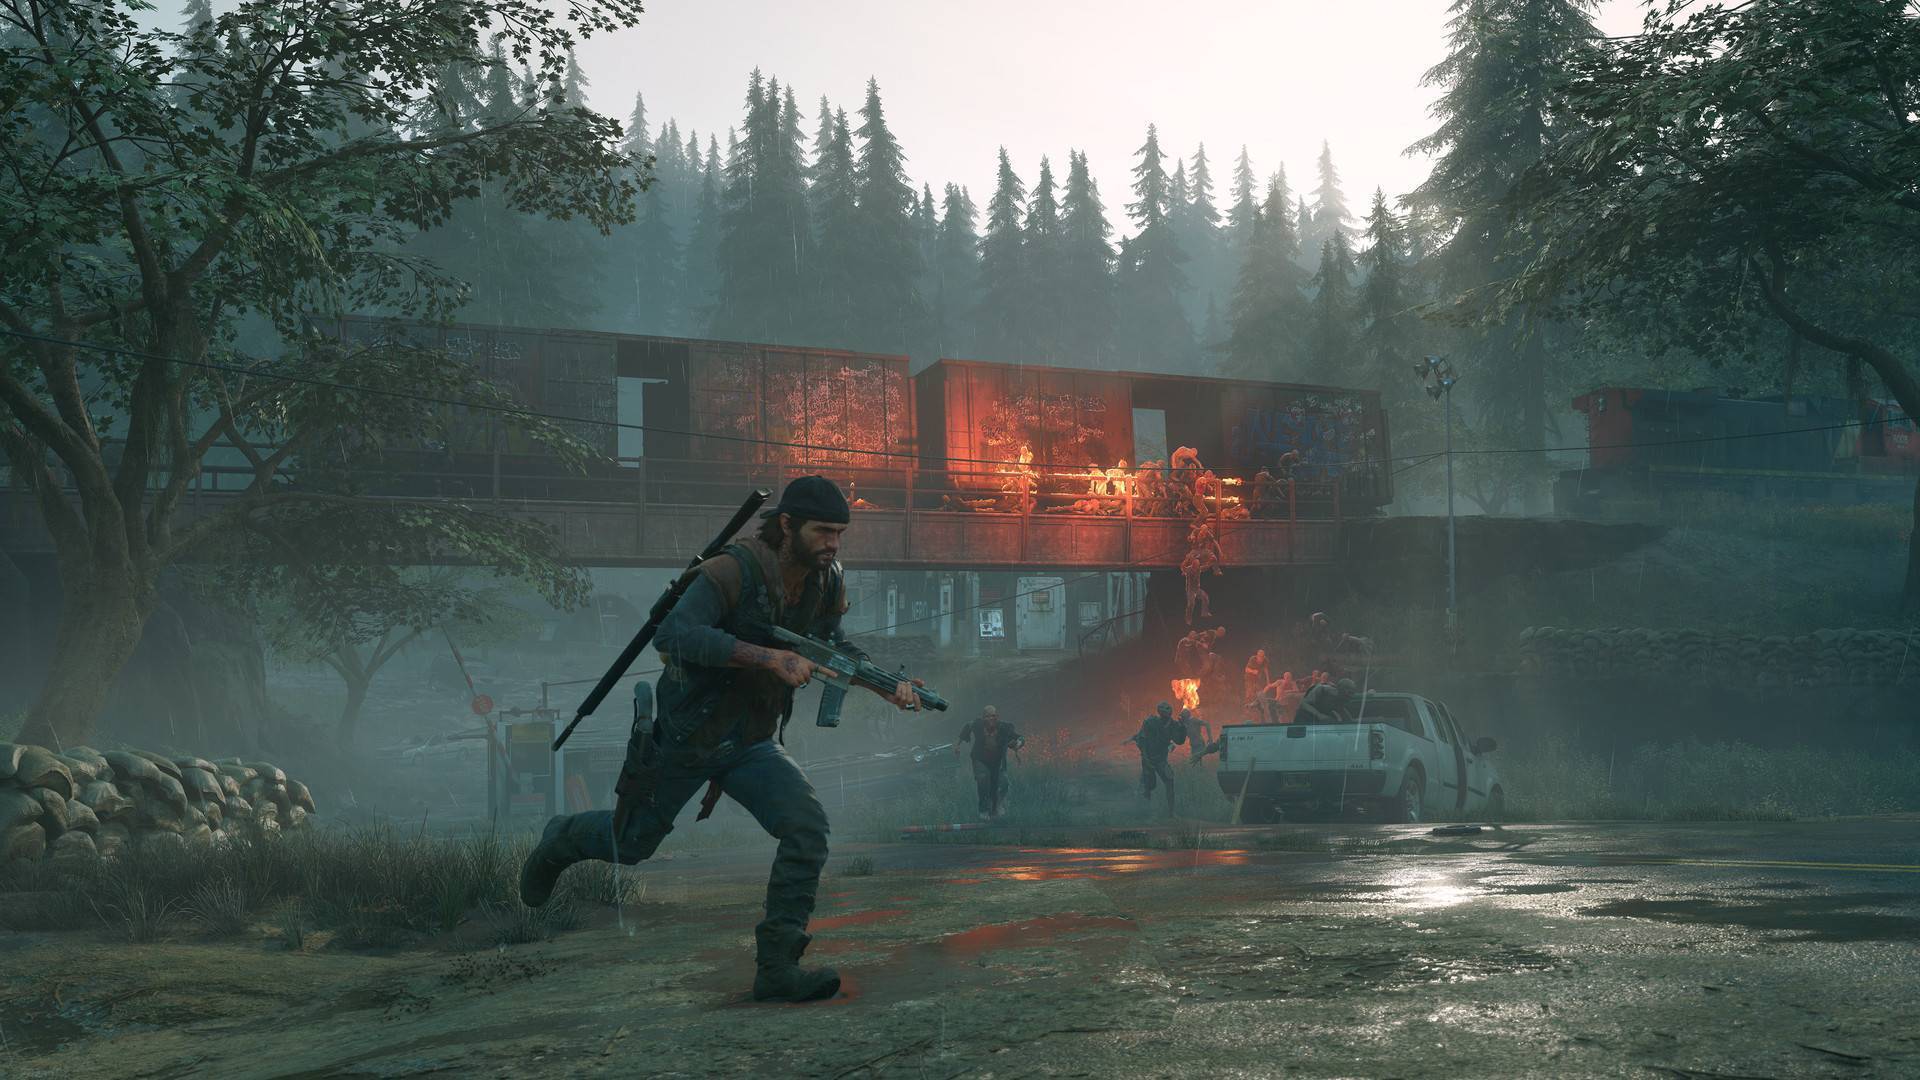 2Cap Days Gone Pc Game Download (Offline only) No CD/DVD/Code